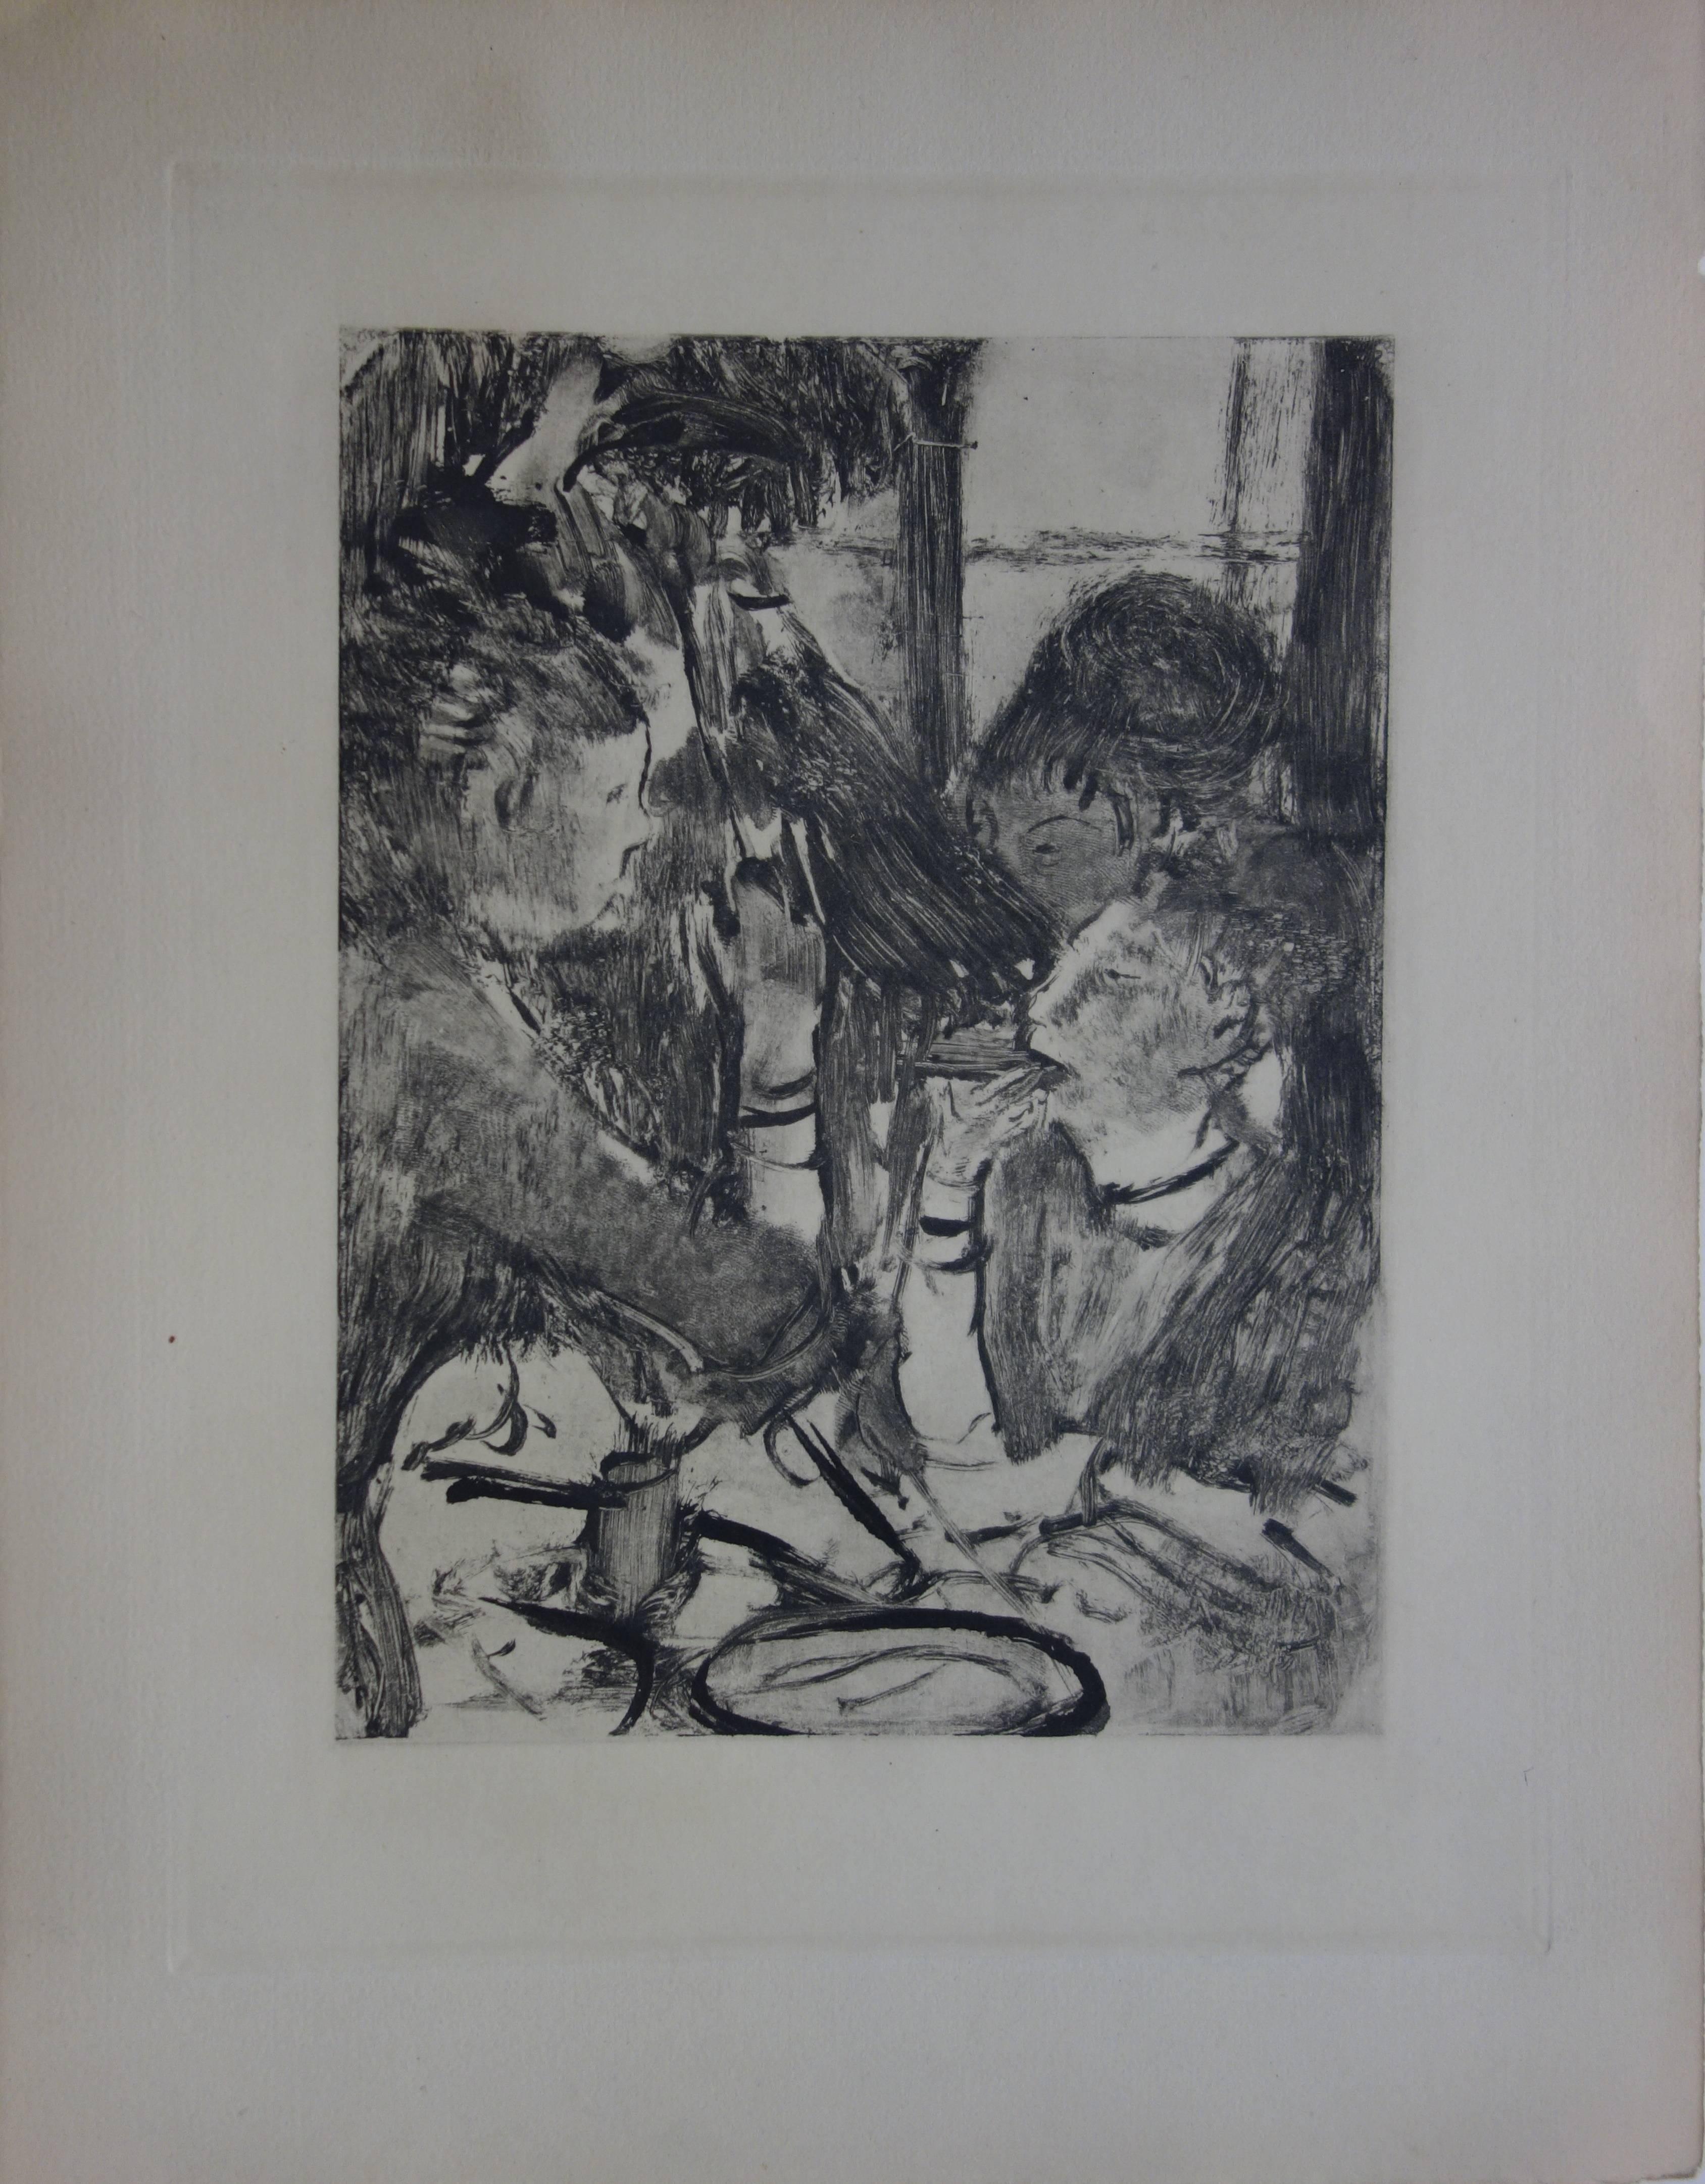 Whorehouse Scene : Prostitutes Sharing a Meal - Original etching - Print by (after) Edgar Degas